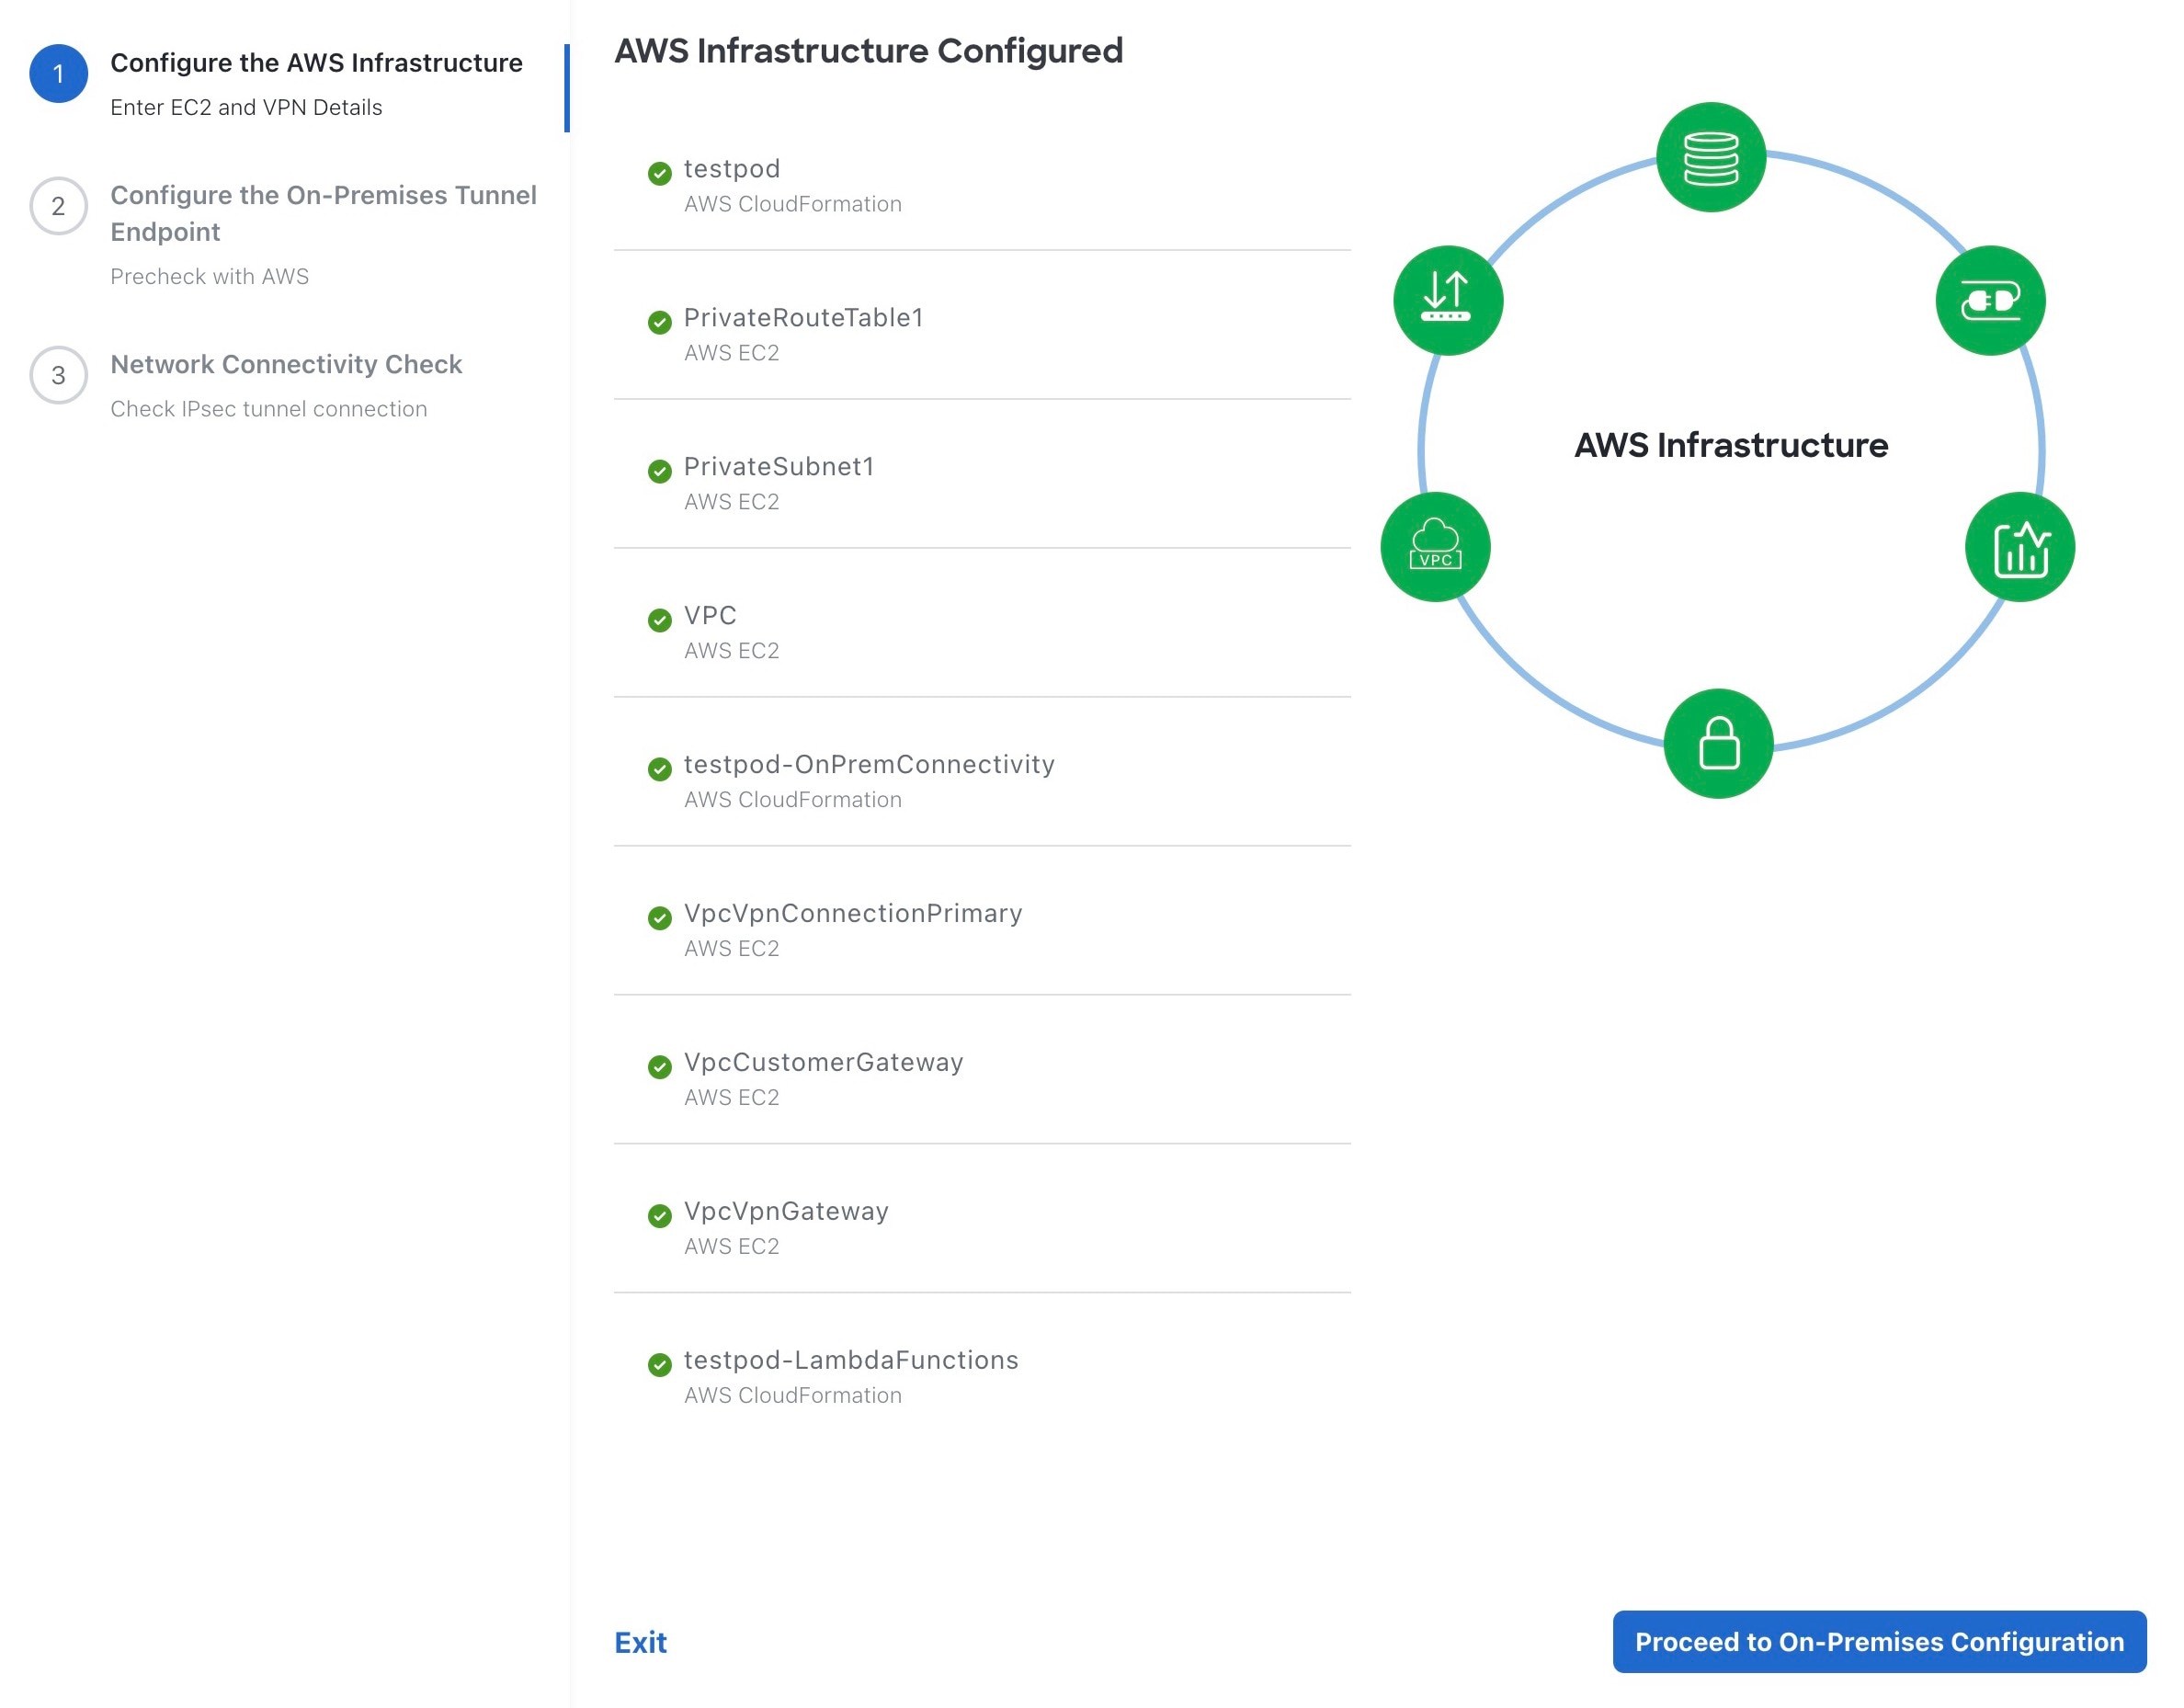 The AWS infrastructure is configured, and the AWS infrastructure diagram is green.